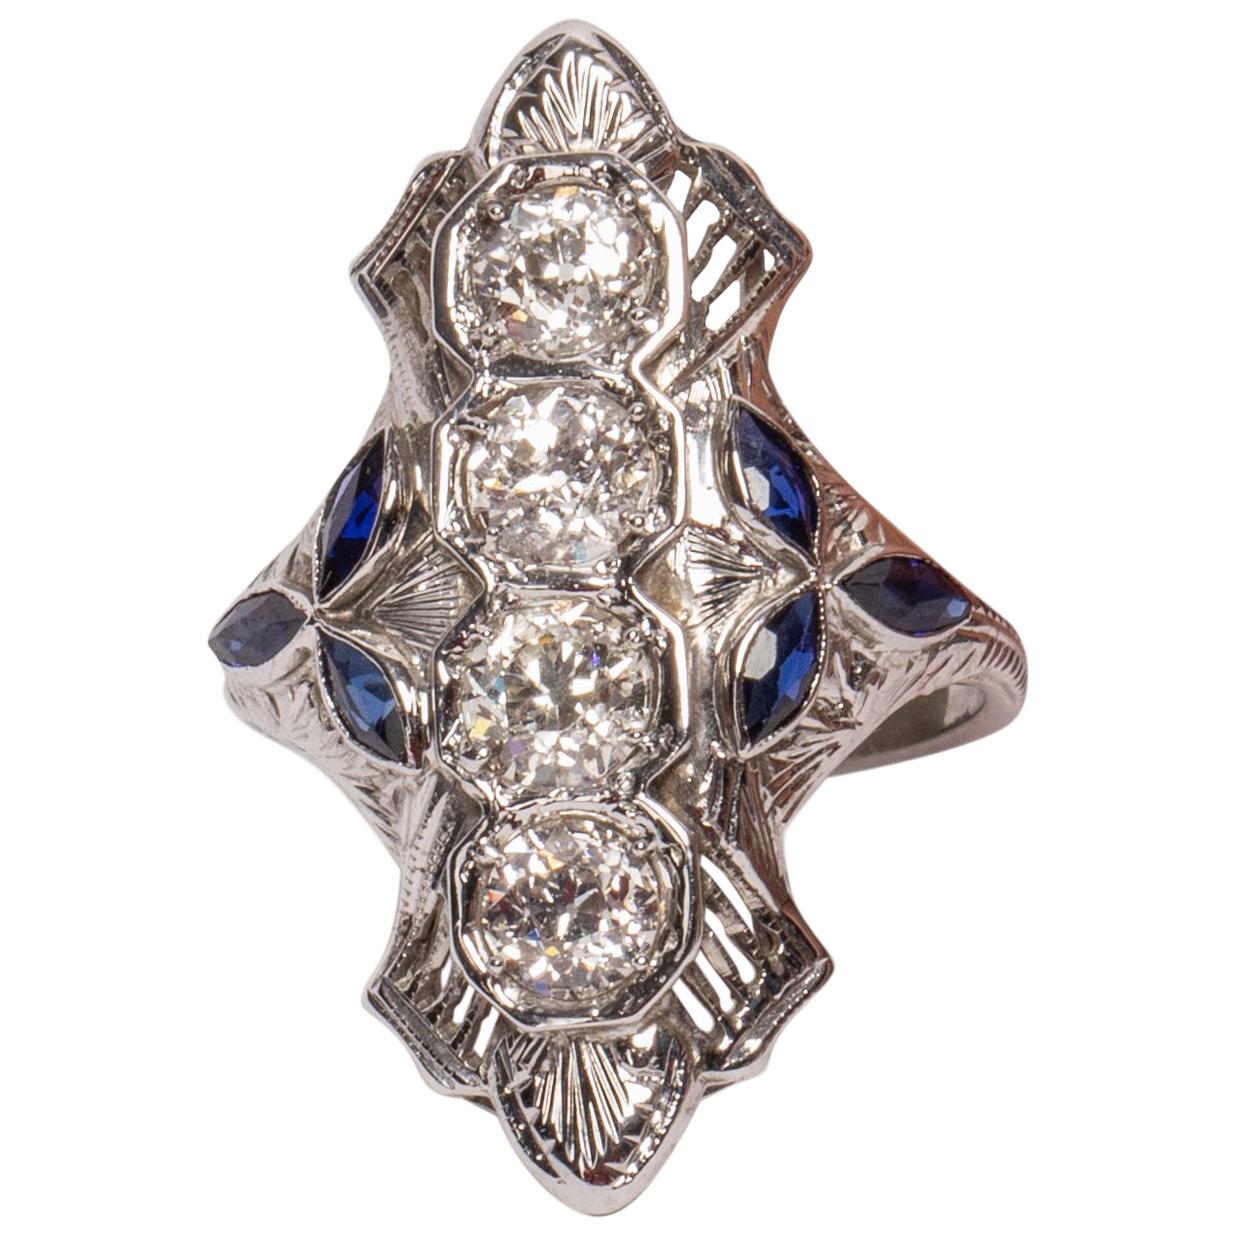 18 Karat Gold Shield Ring with 4 Old Euro Cut Diamonds w/ Tris of Blue Sapphires